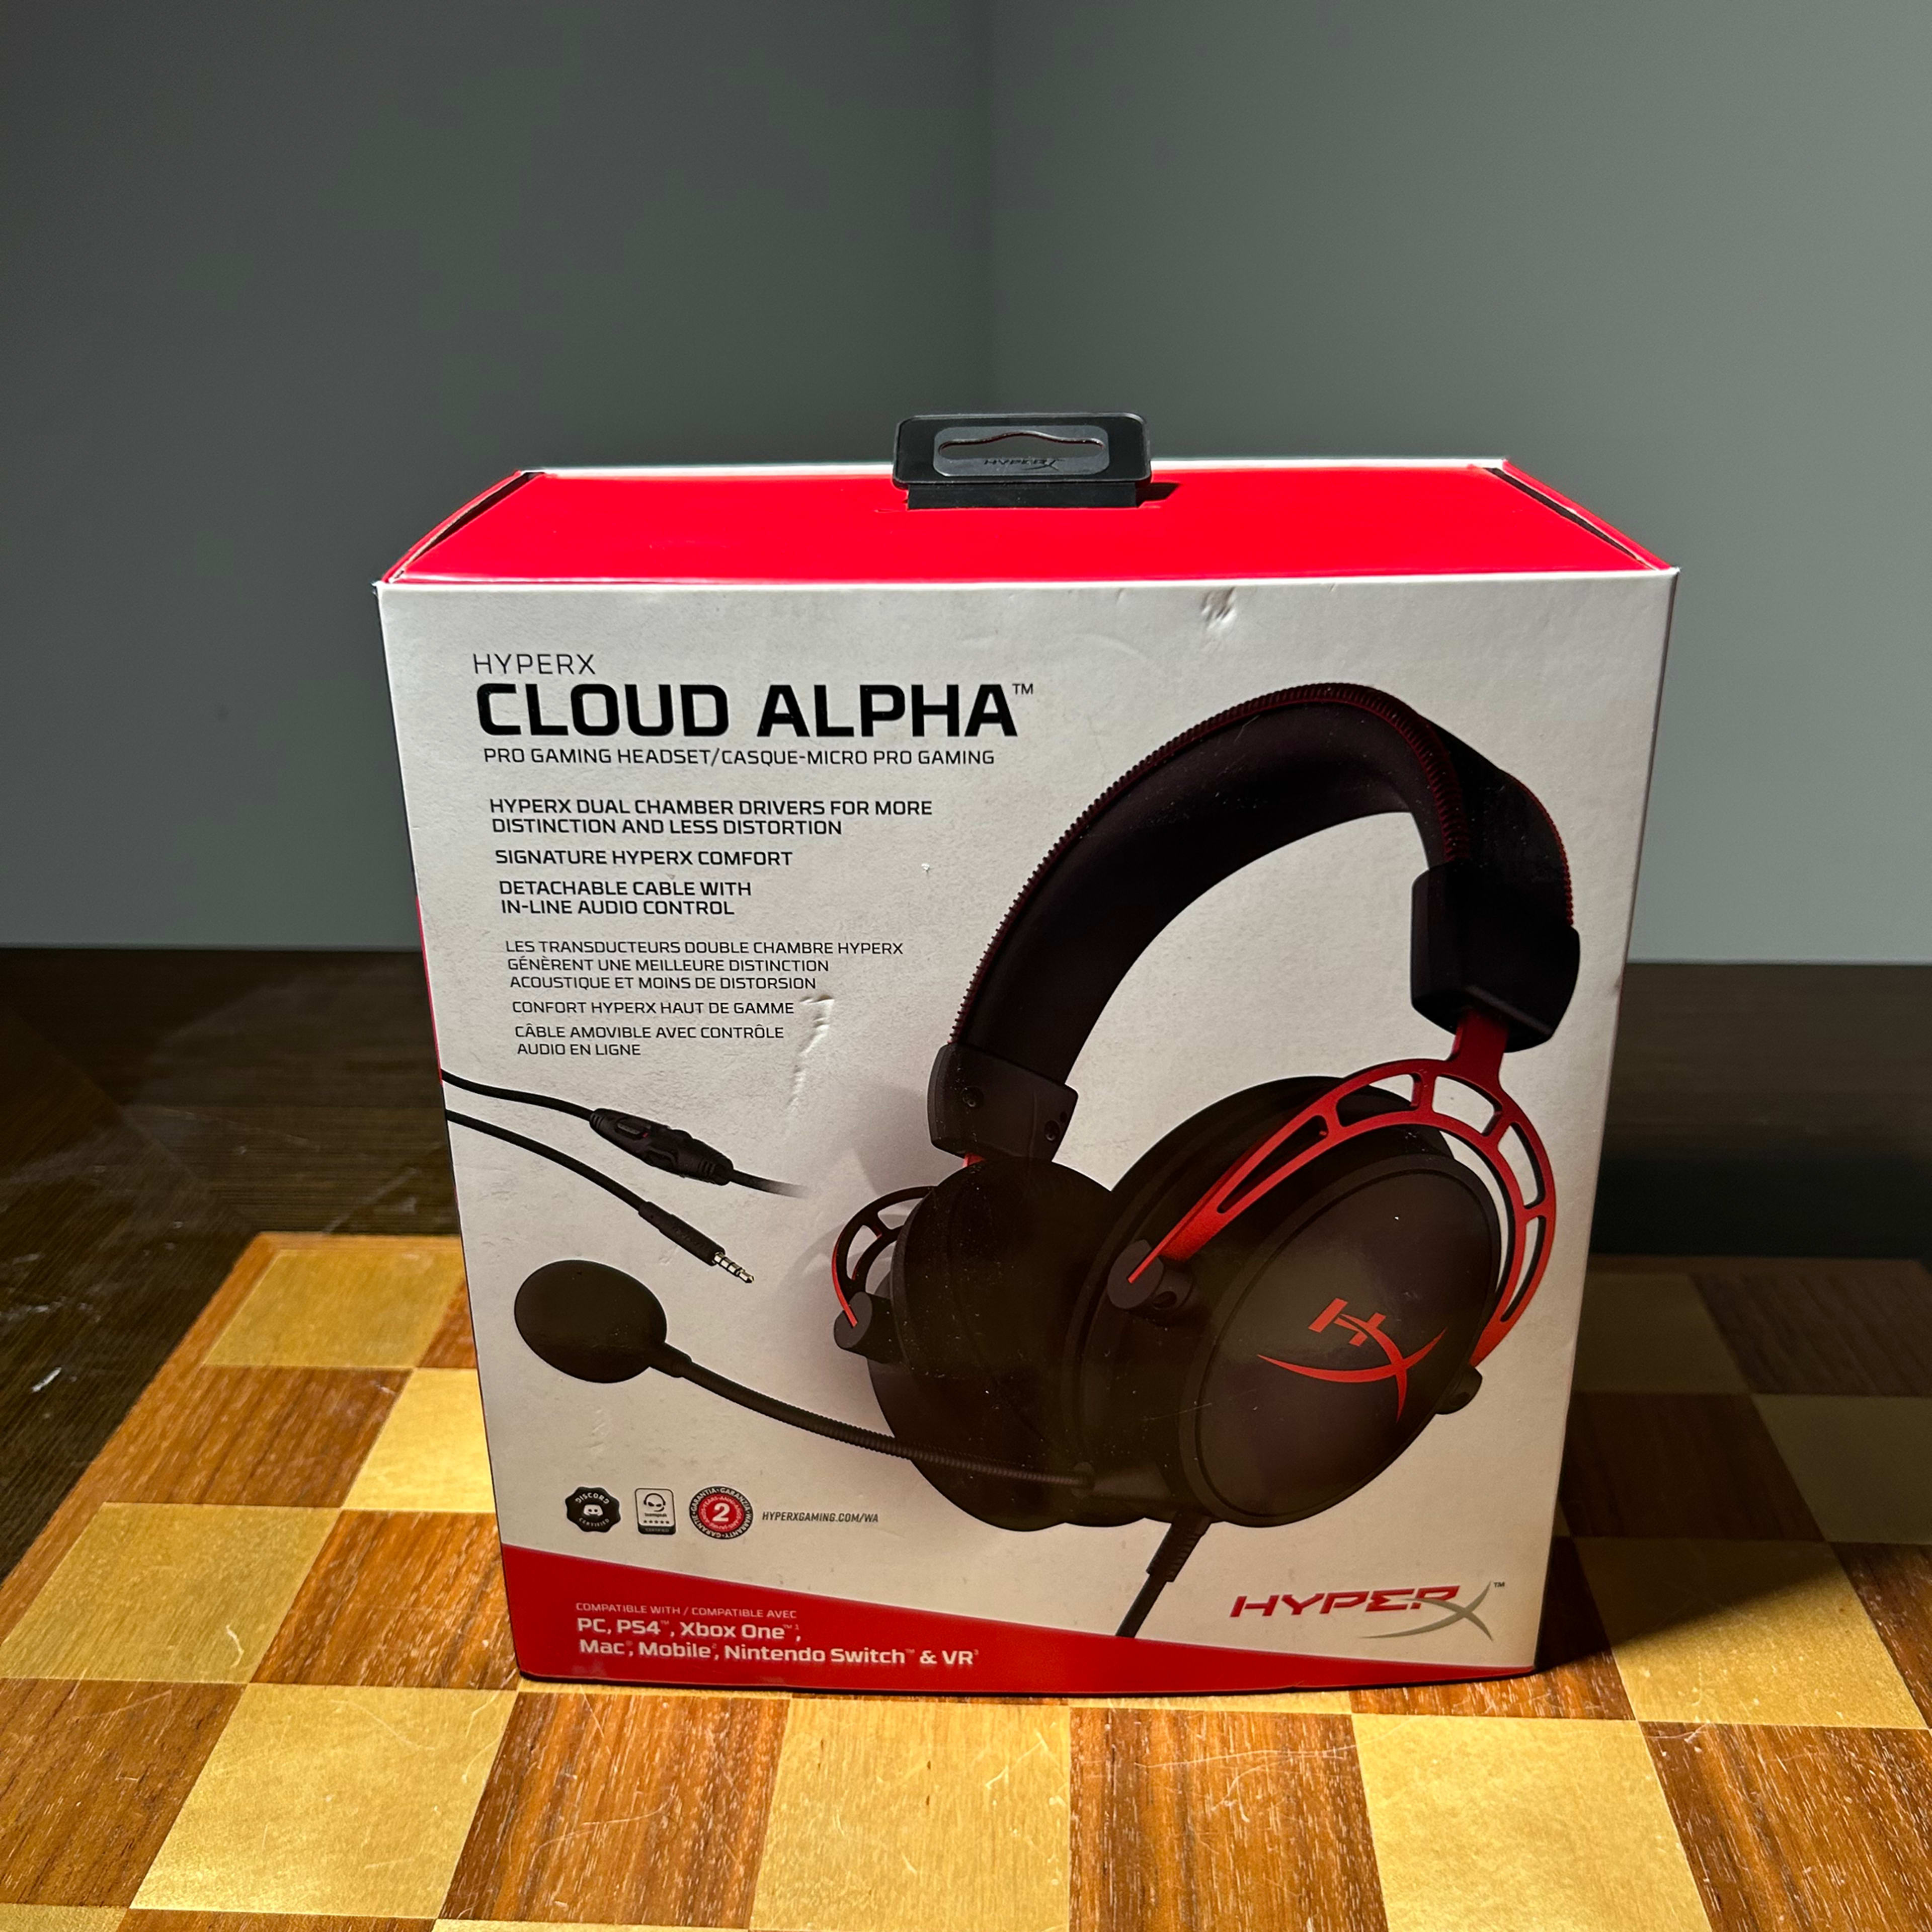 Kingston HyperX Cloud Alpha Gaming Headset for PC, Consoles, and Mobile